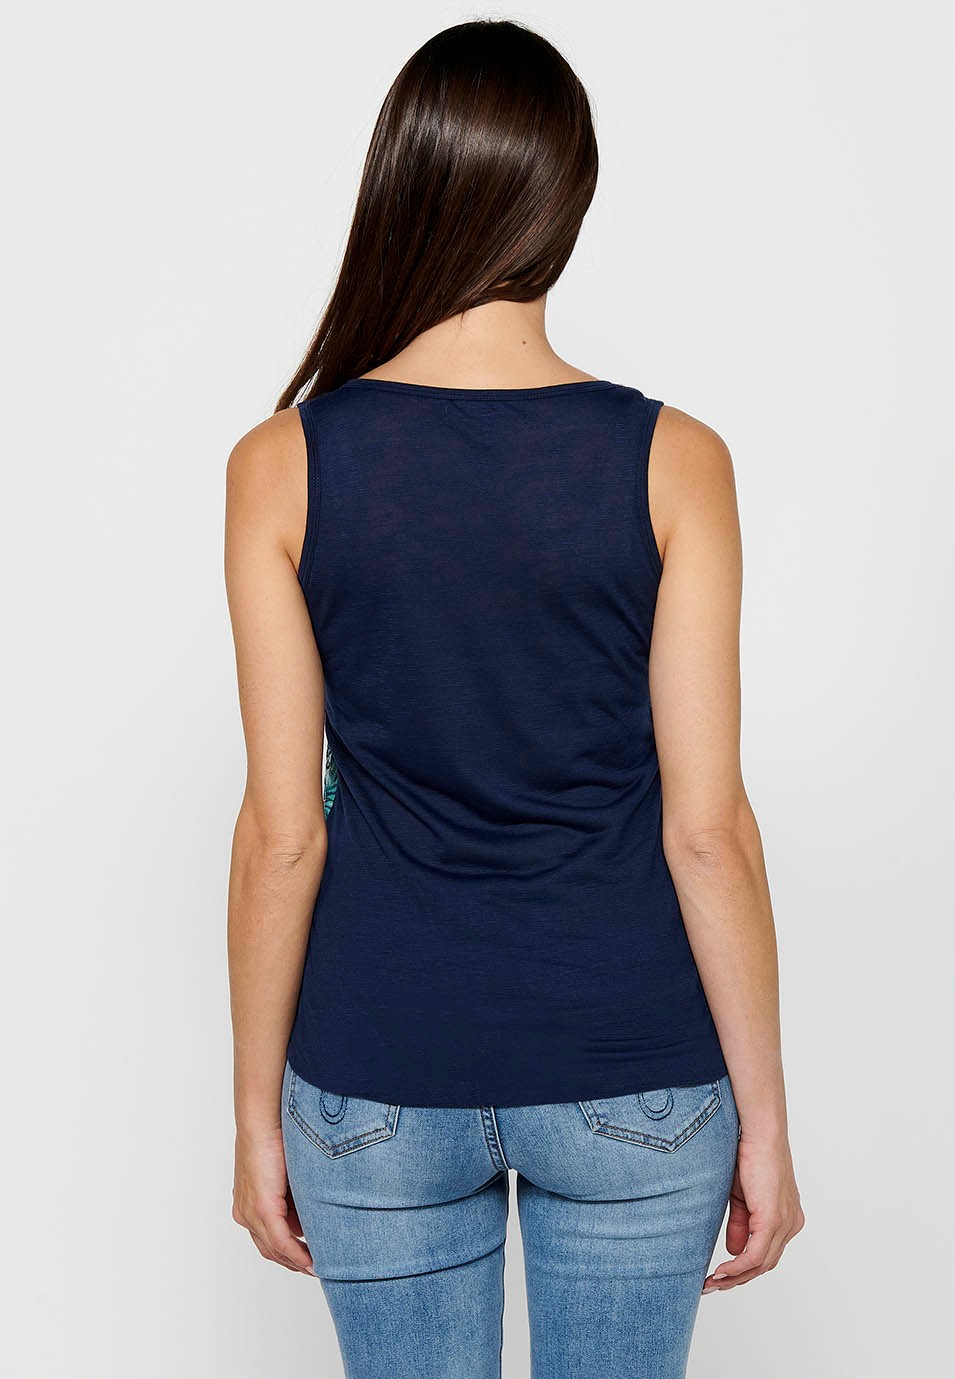 Navy Tank Top with Round Neckline and Floral Print and Front Sequins for Women 8